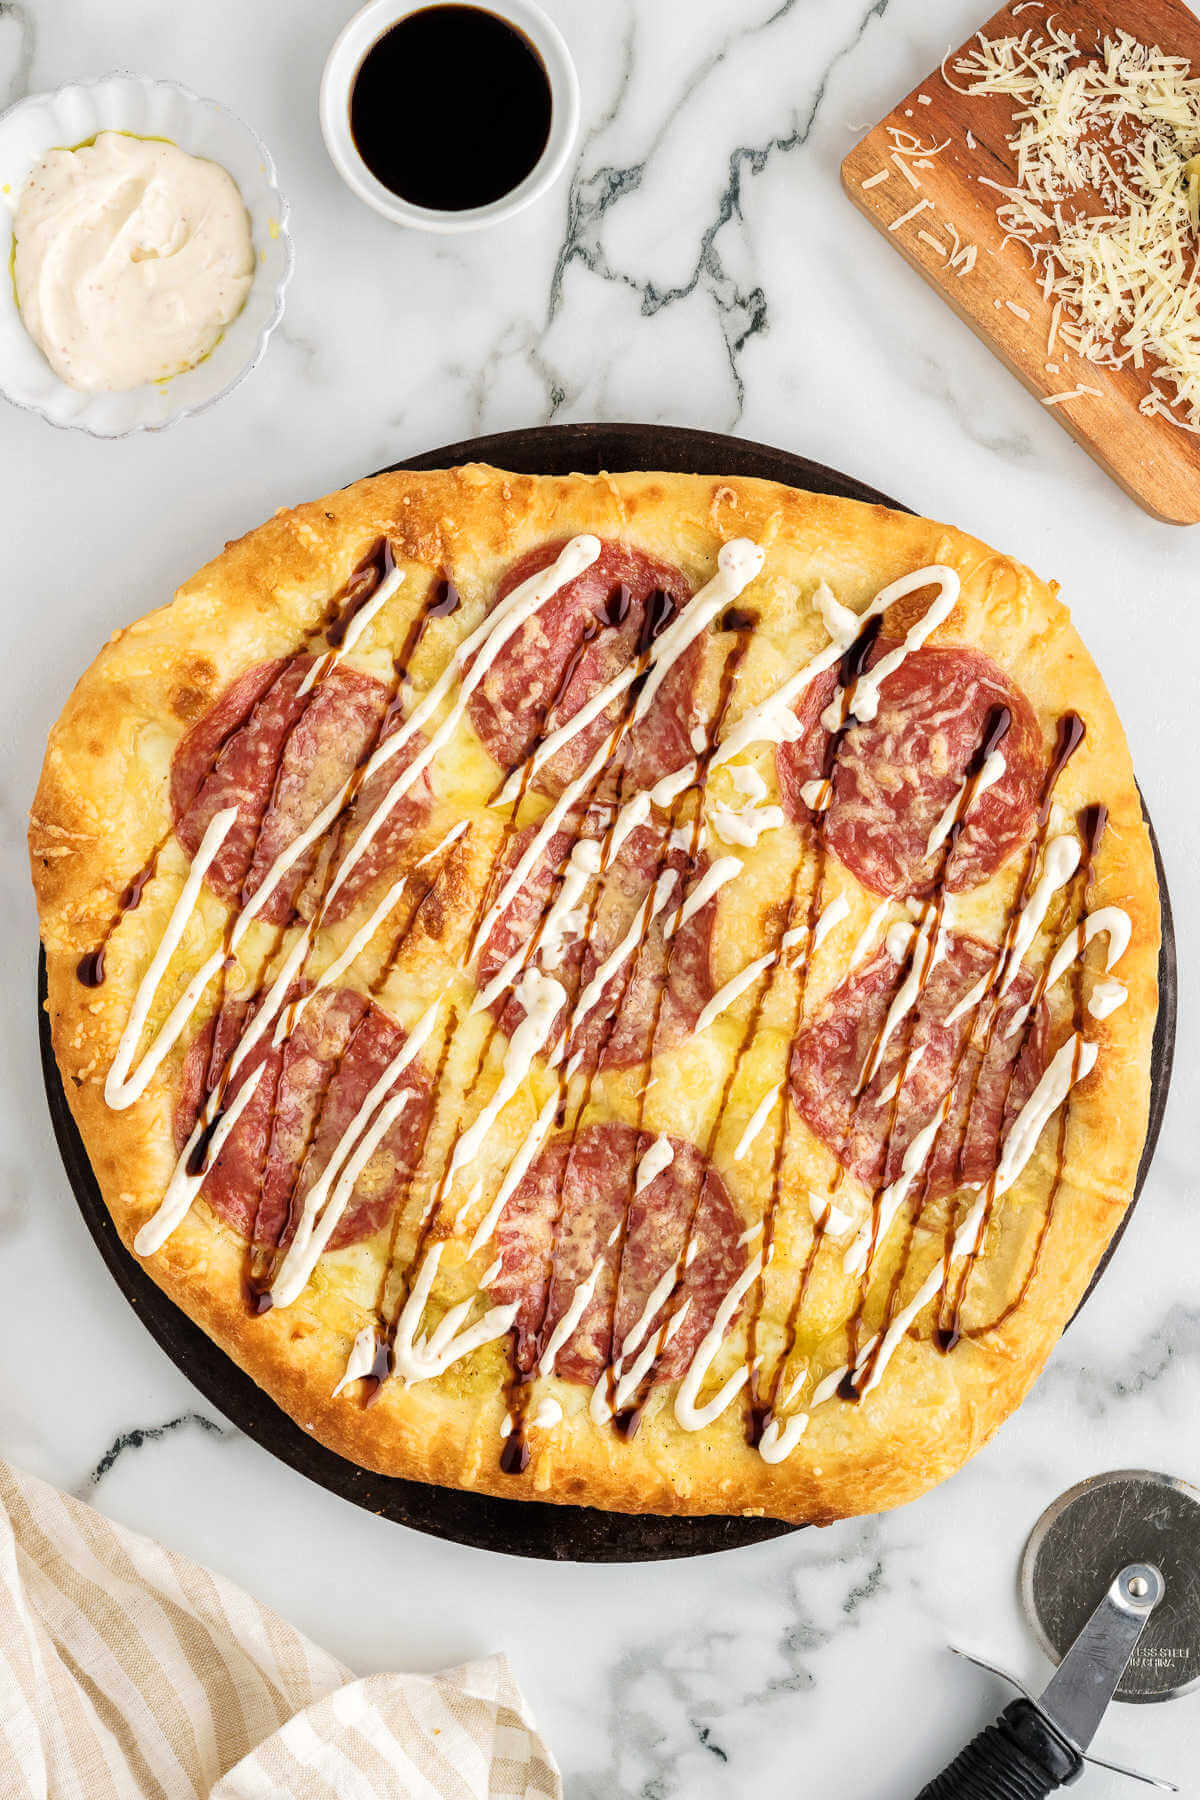 salami pizza drizzled with garlic aioli and balsamic vinegar on a table with a pizza cutter.